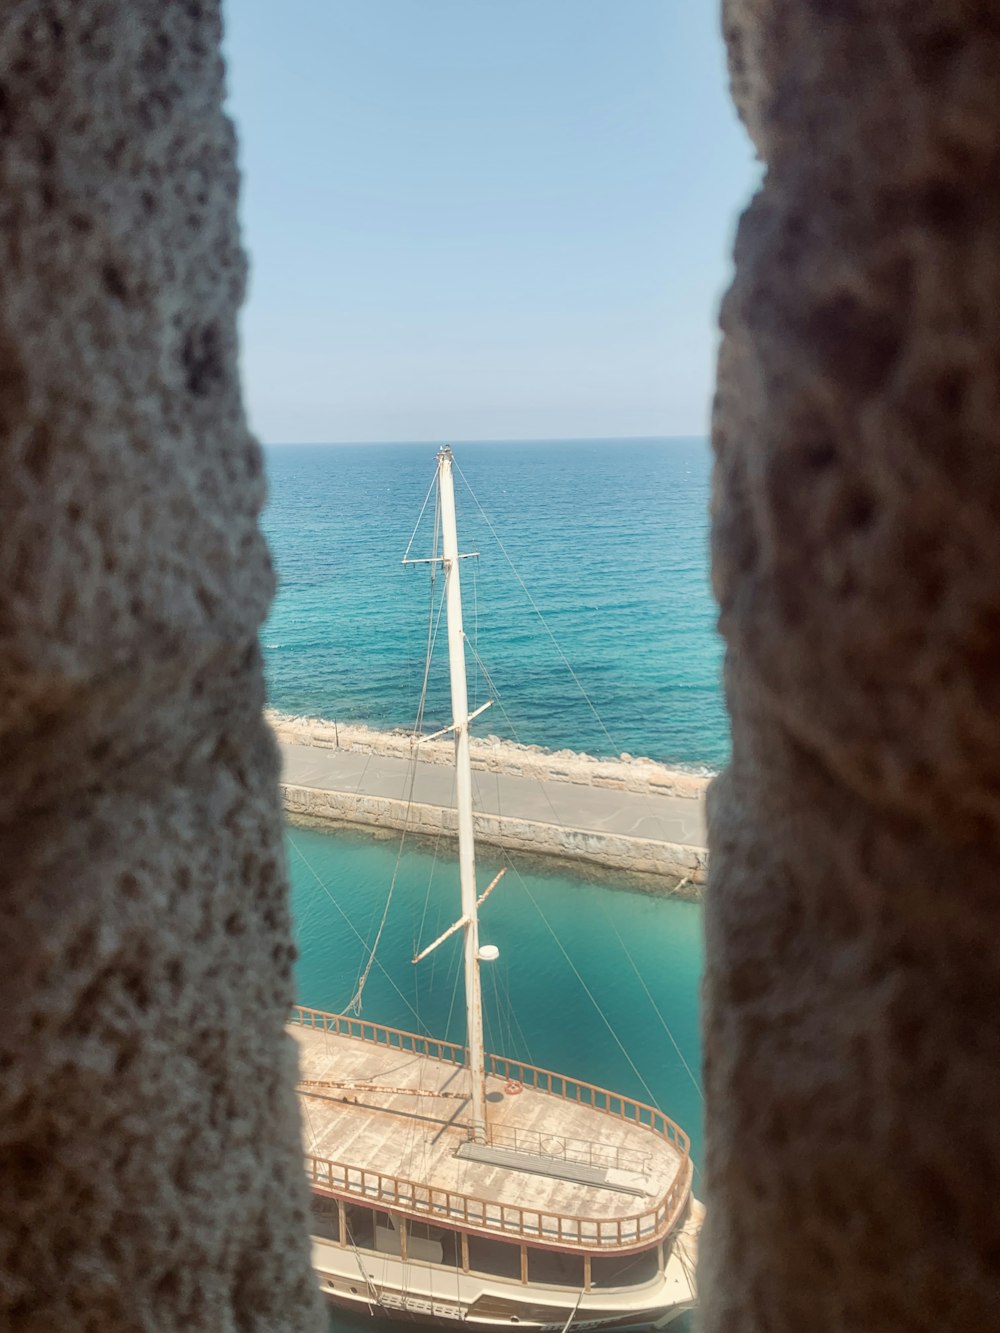 a view of a sailboat from a window in a stone wall